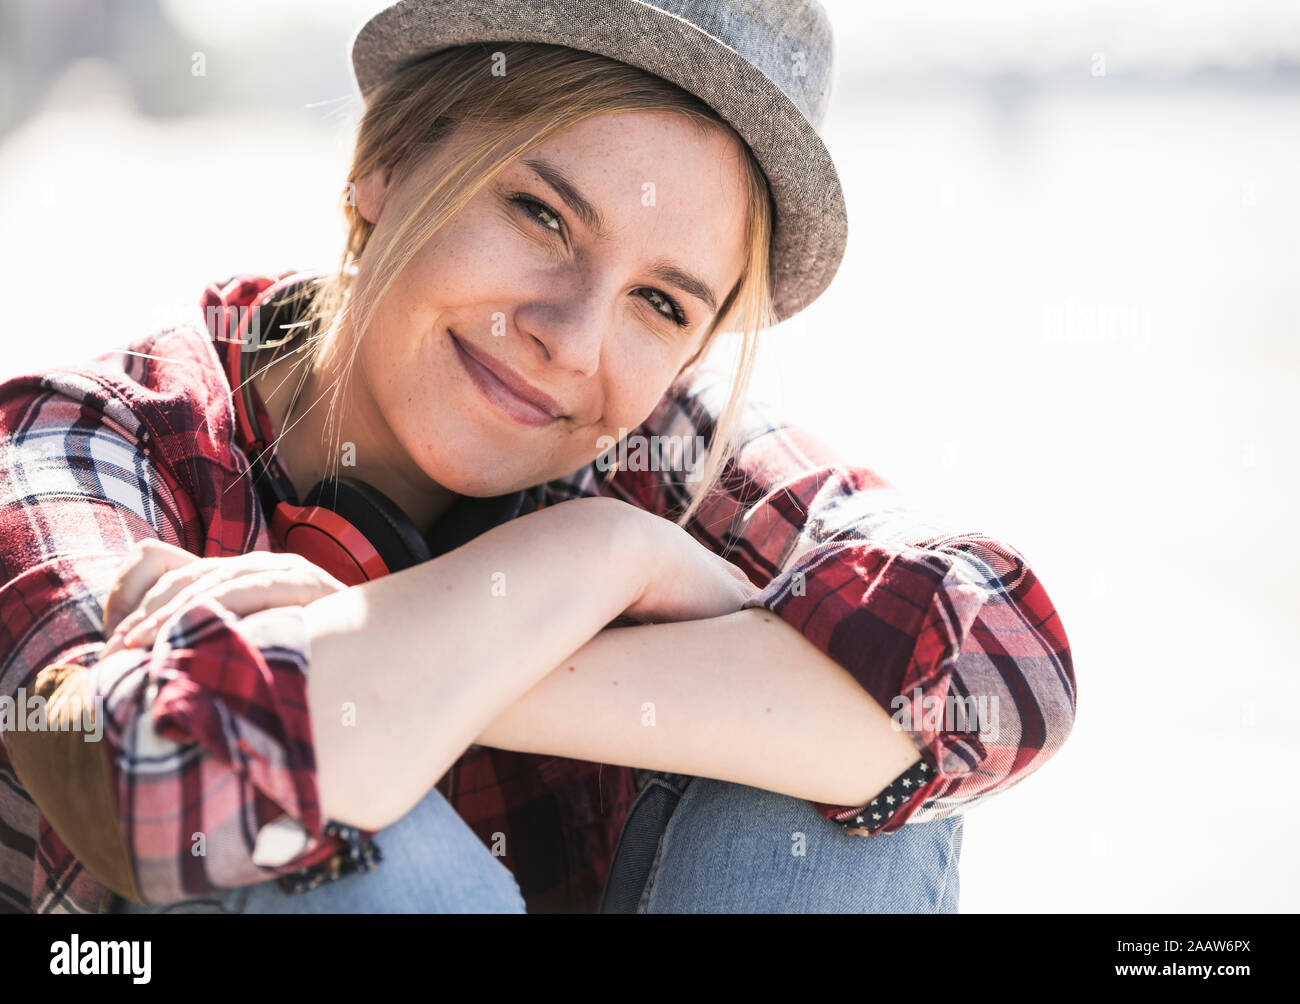 Portrait of young smiling woman with hat Stock Photo